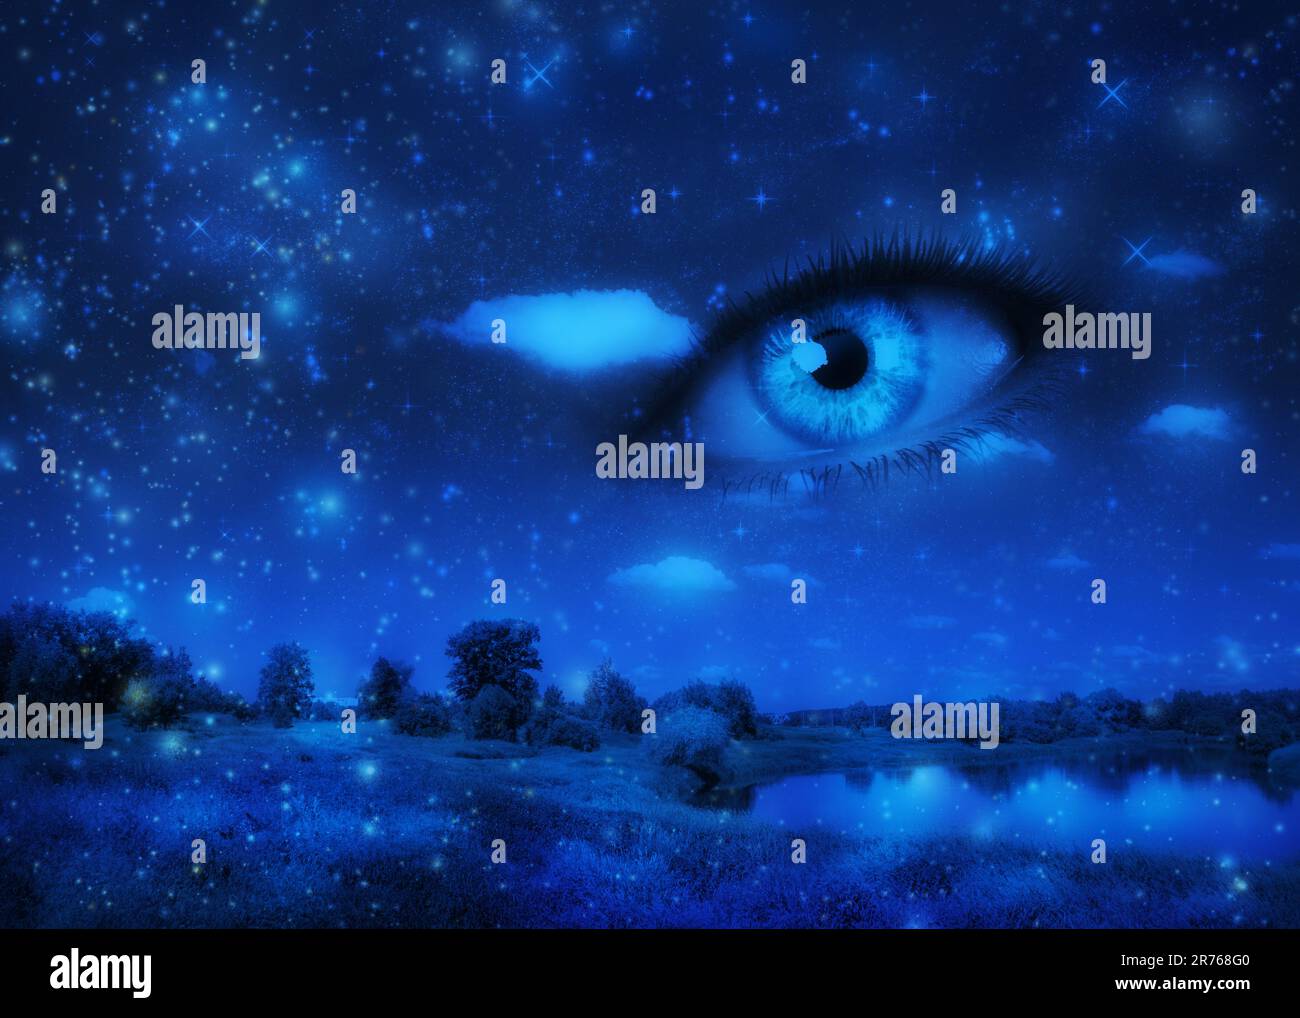 Surreal night landscape with 3D human eye in the sky, abstract illustration. Stock Photo